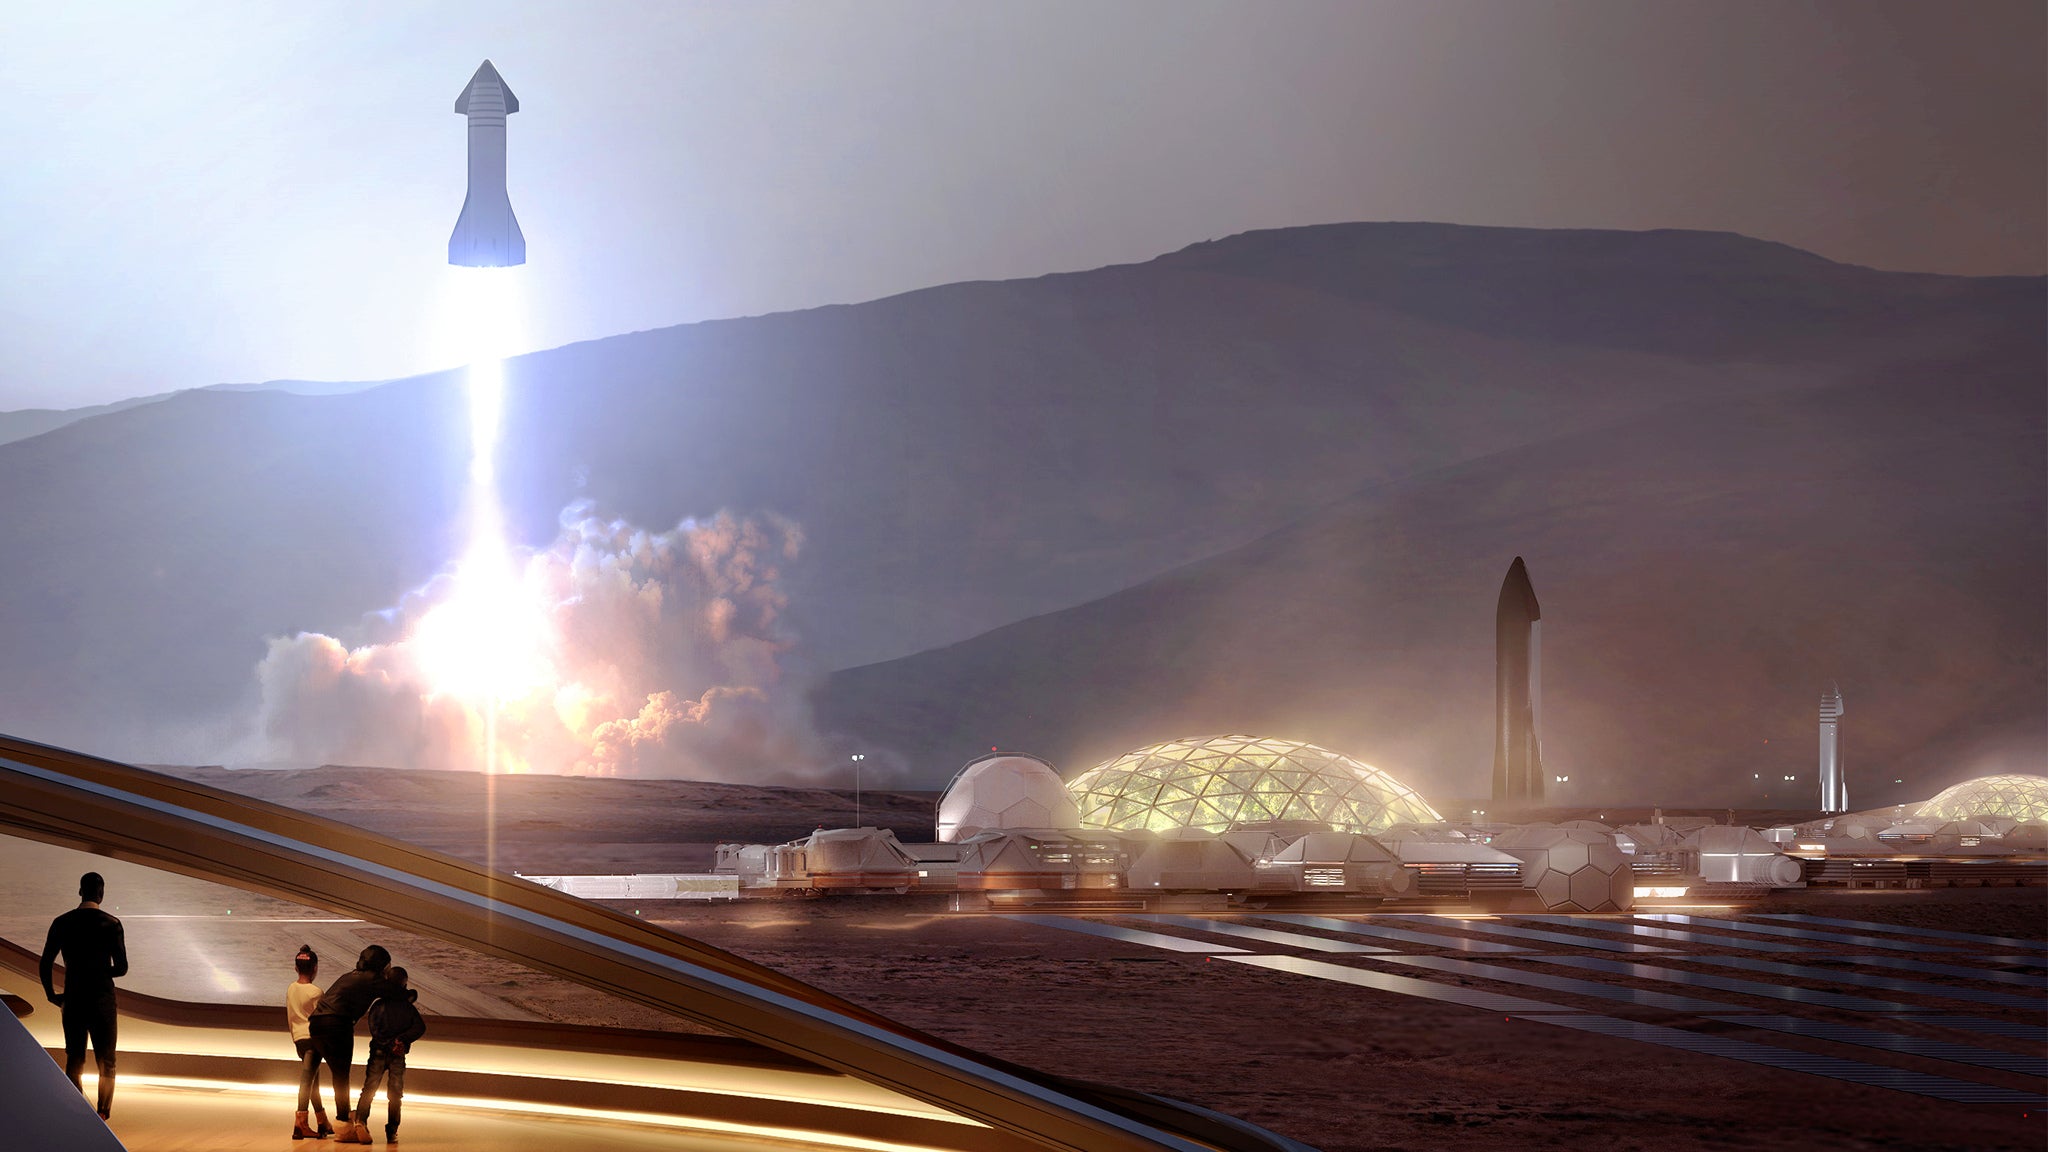 Elon Musk Discusses Mars Colonization, Says SpaceX Will ‘Need The Spaceships Back’ & People Will Have The Opportunity To Return To Earth